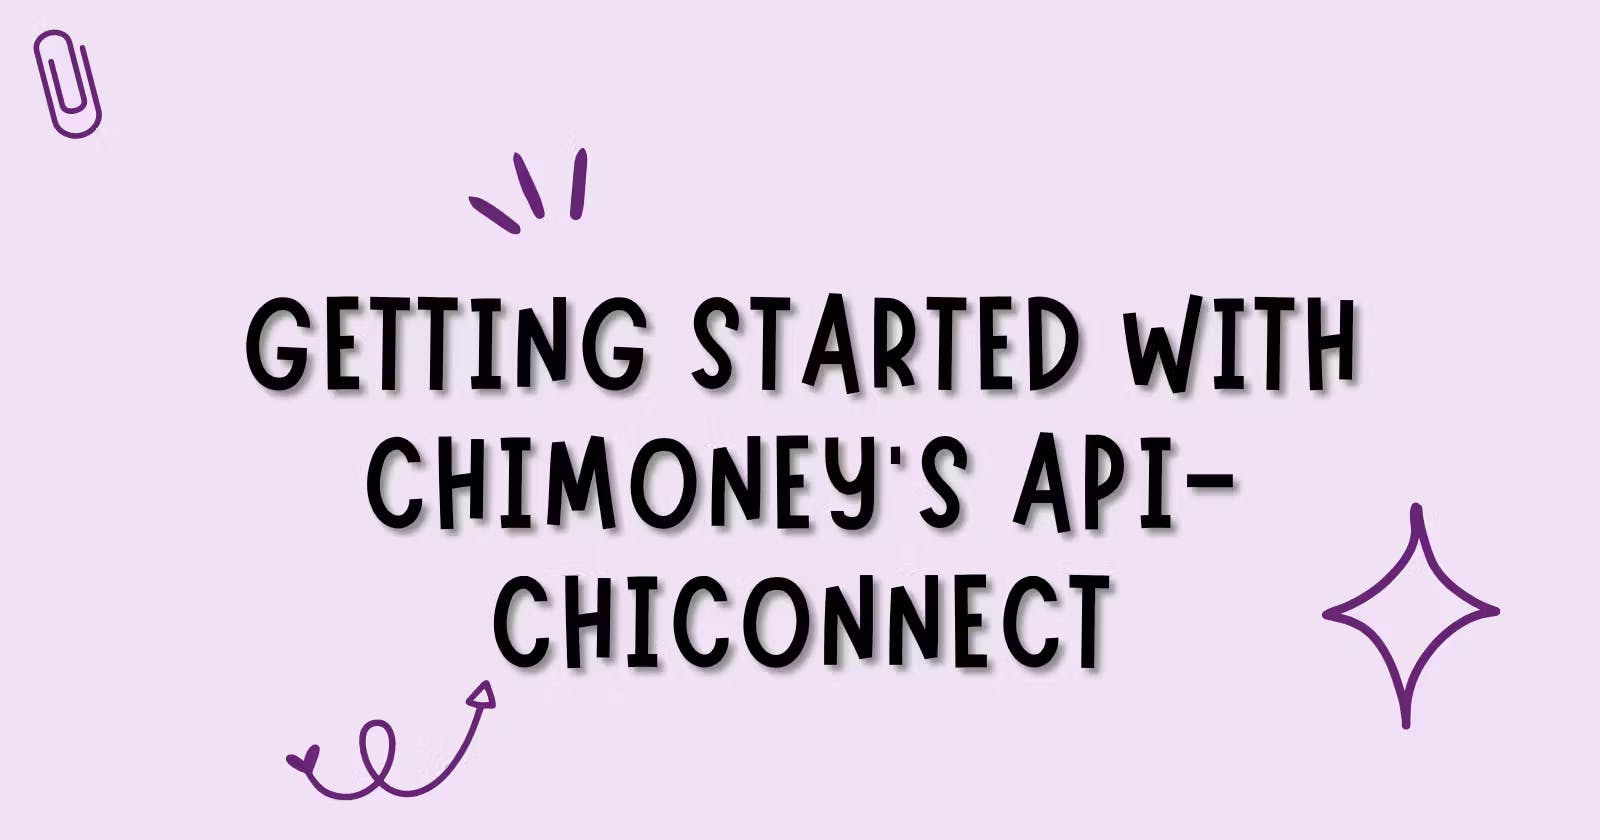 Getting started with Chimoney's API - ChiConnect